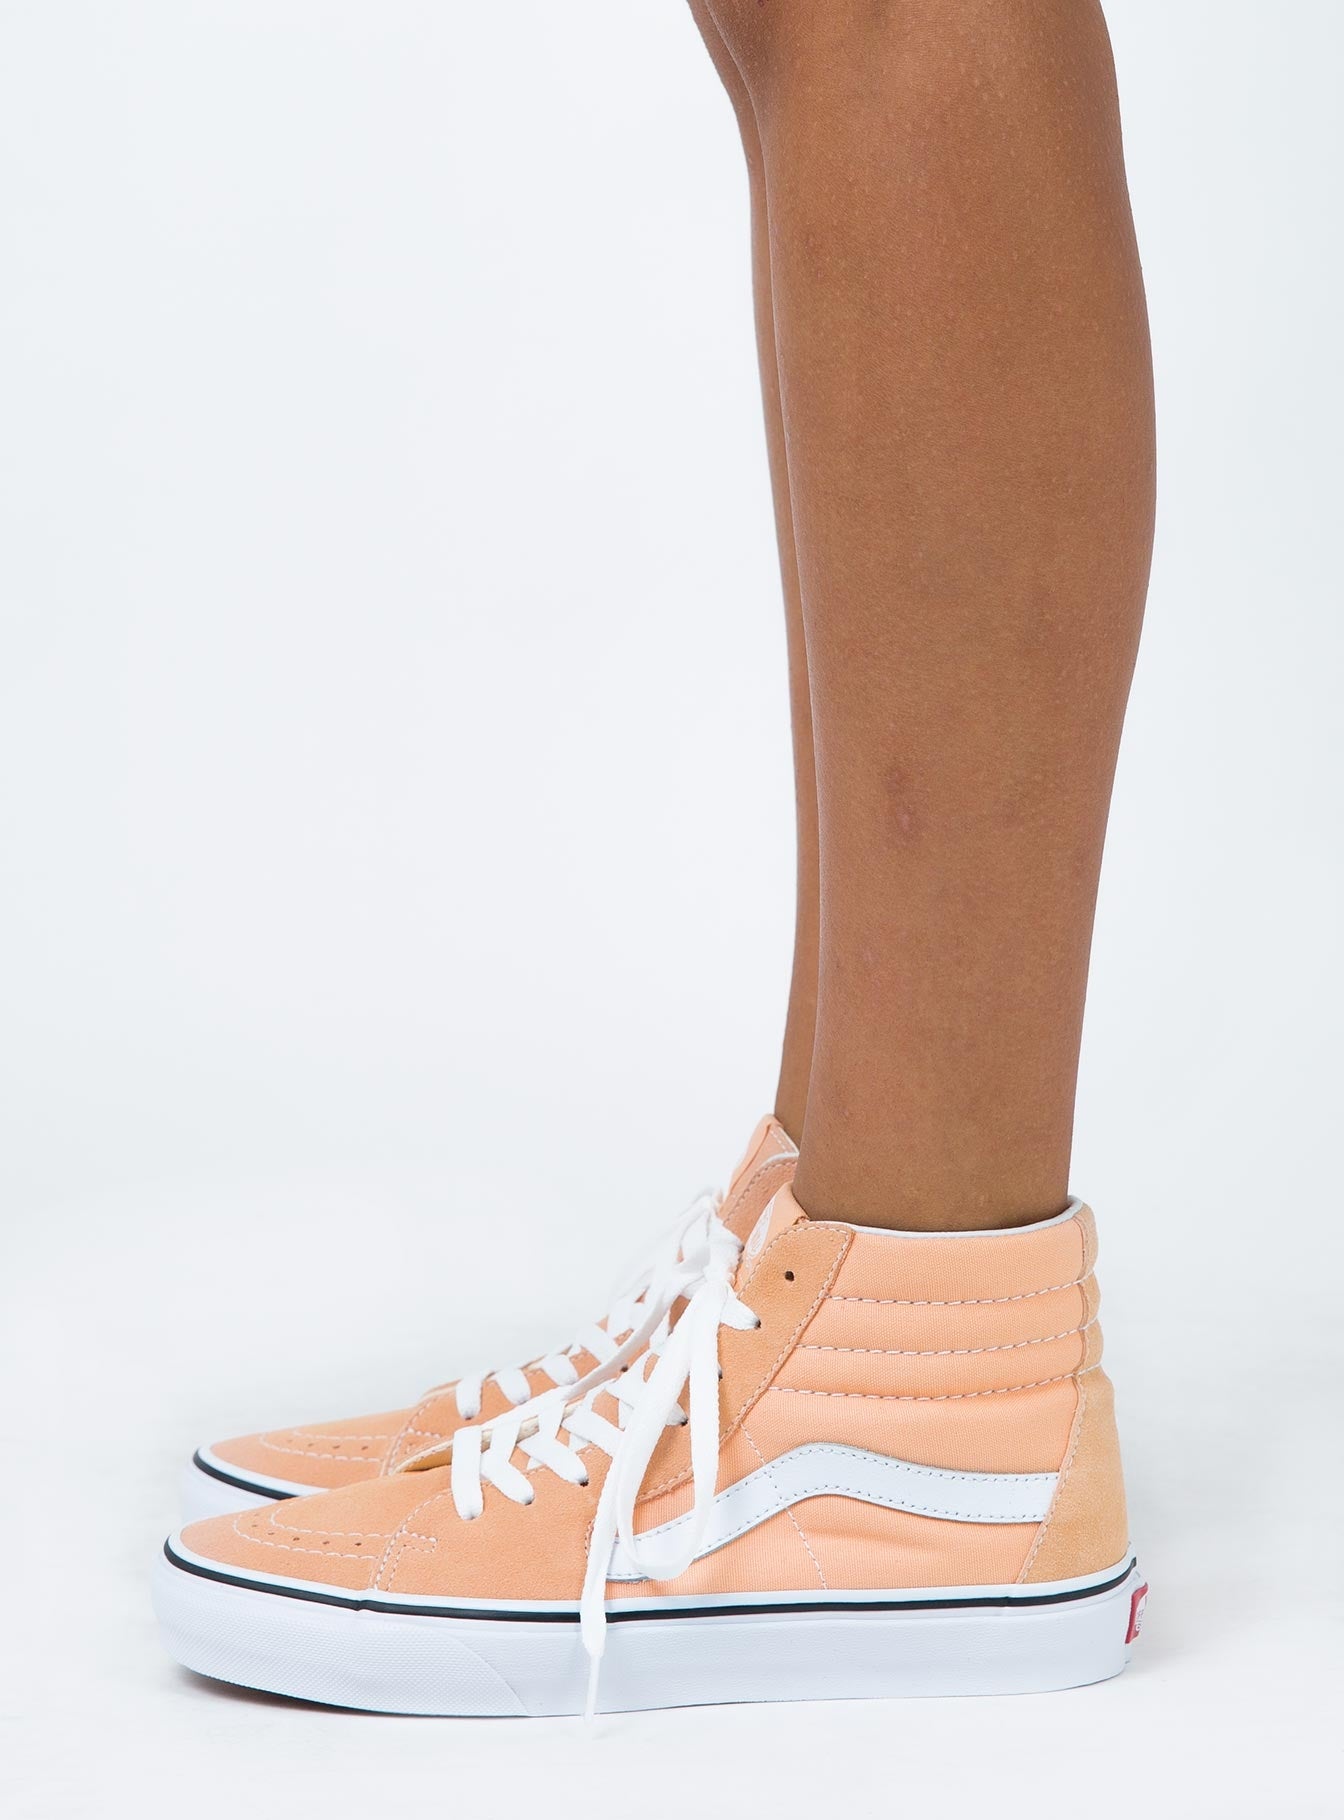 bleached apricot vans outfit